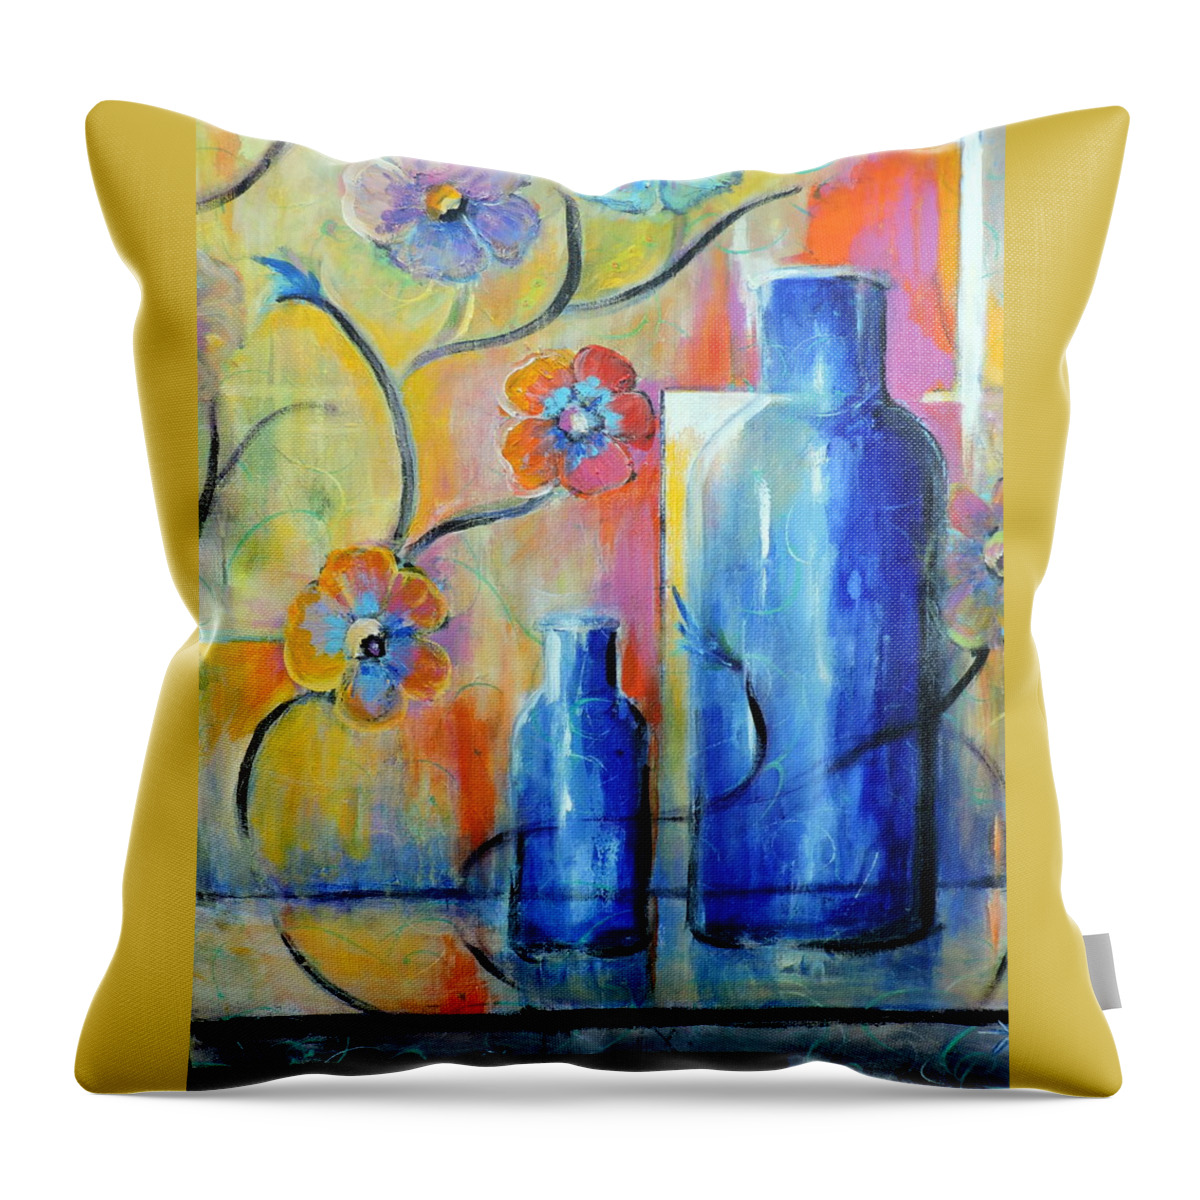 Still Life Throw Pillow featuring the painting Ray's Blue by Jodie Marie Anne Richardson Traugott     aka jm-ART